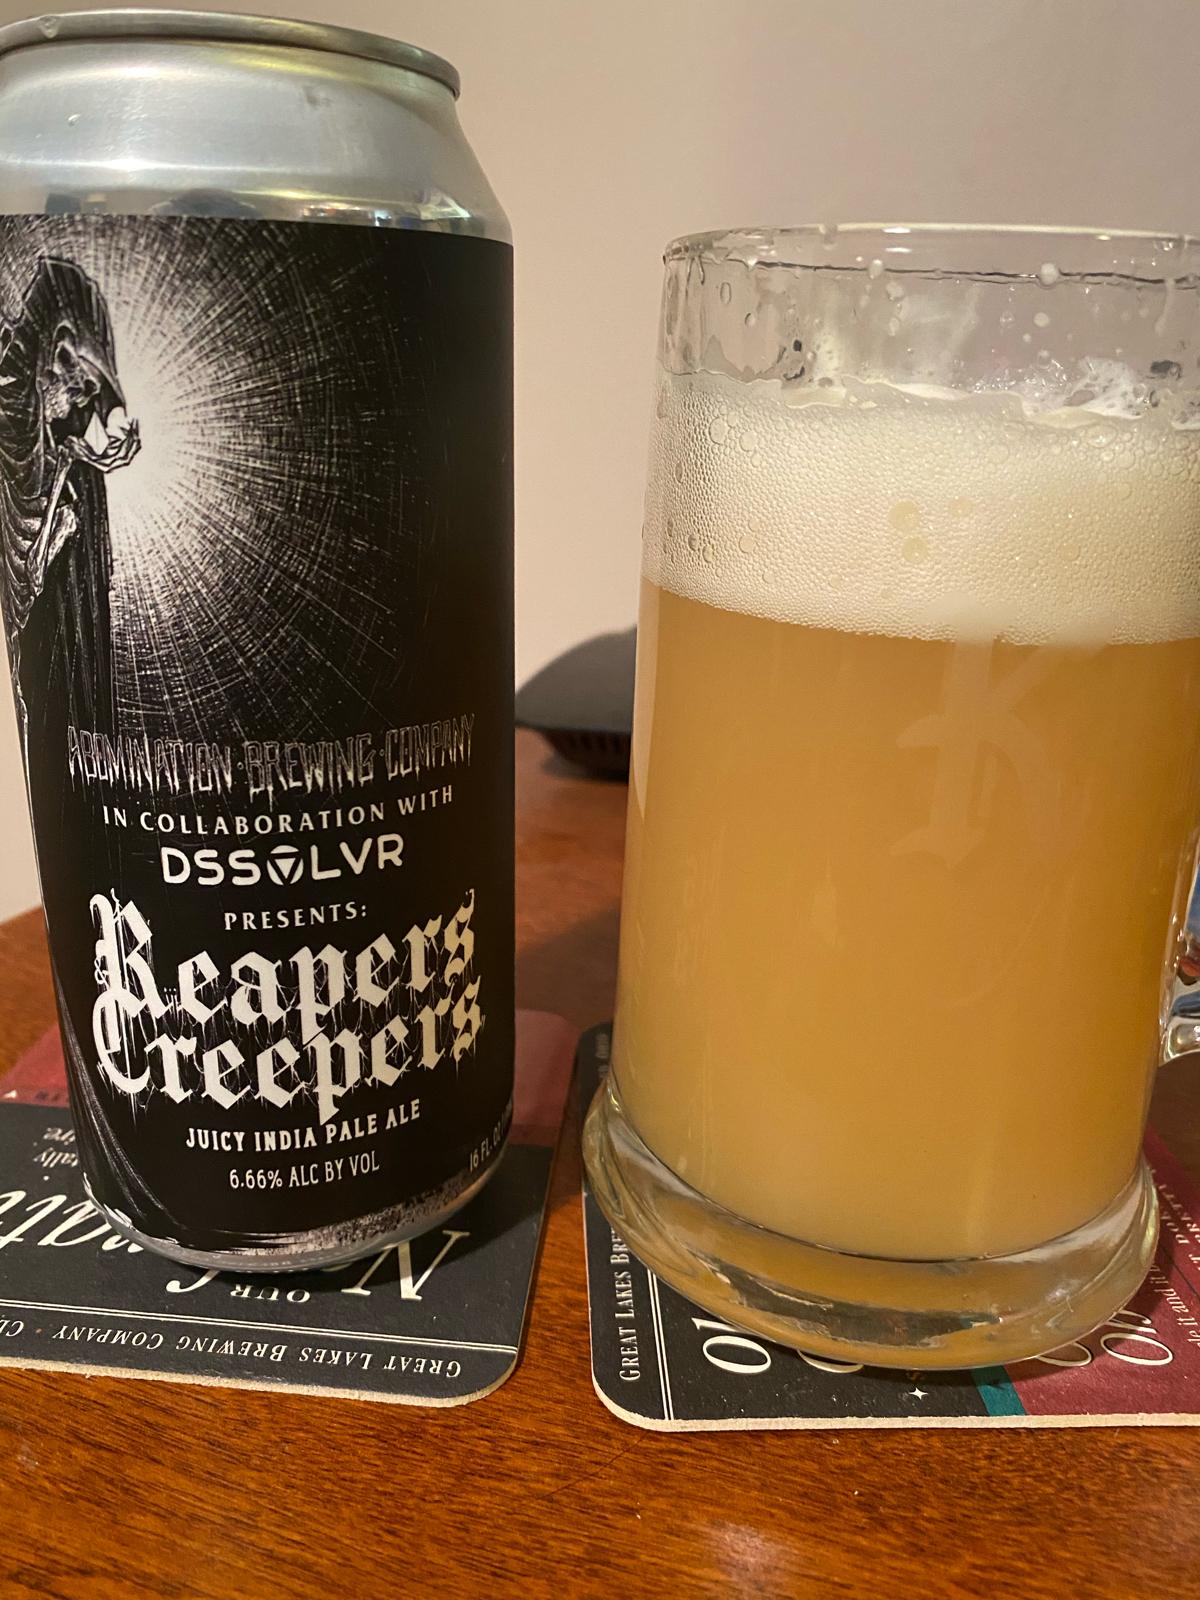 Reapers Creepers (Collaboration with Dssolvr)